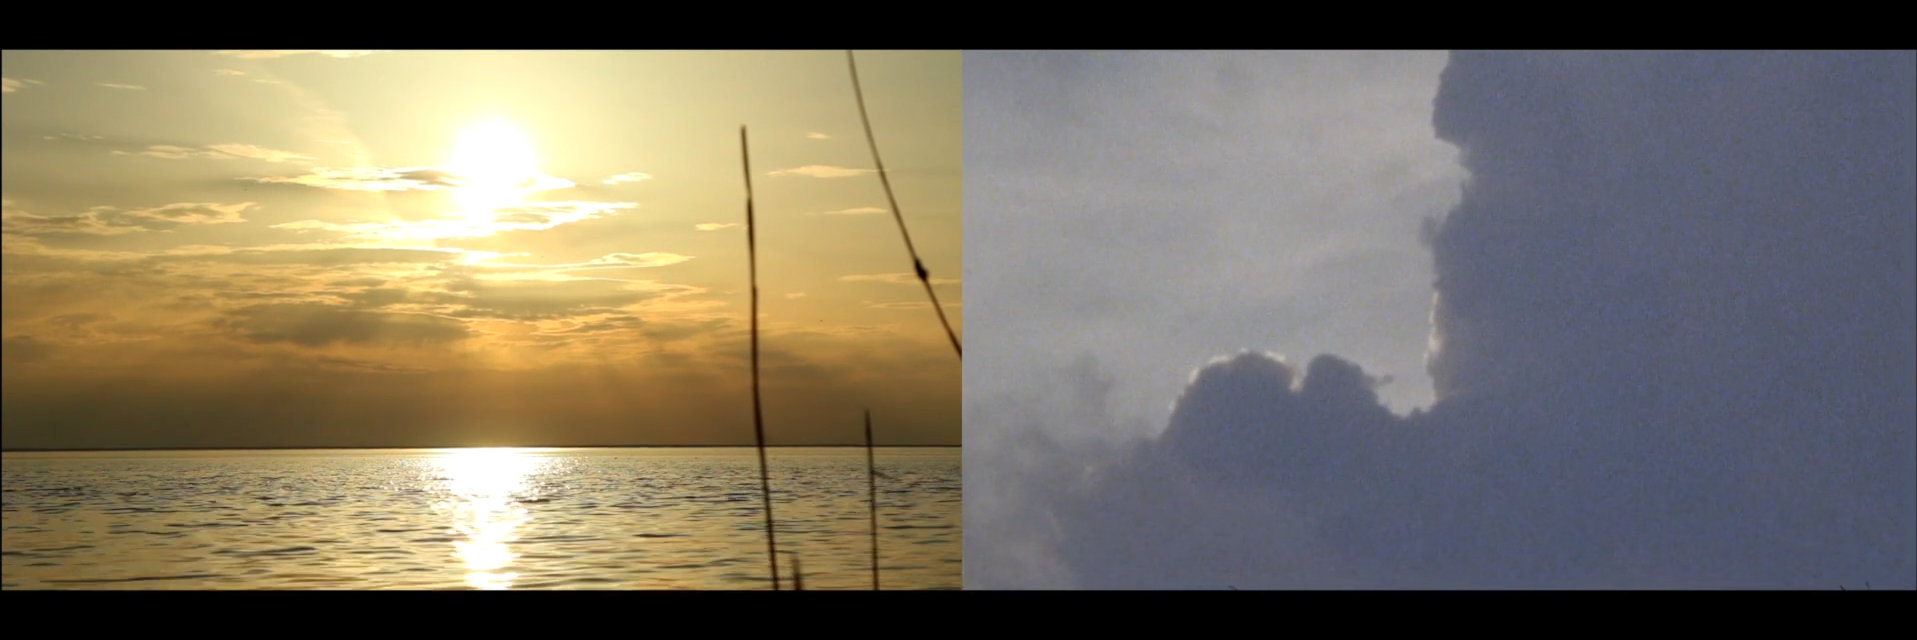 A dual screen capture of a body of water at sunset on the left and a dark ominous clouds on the right.